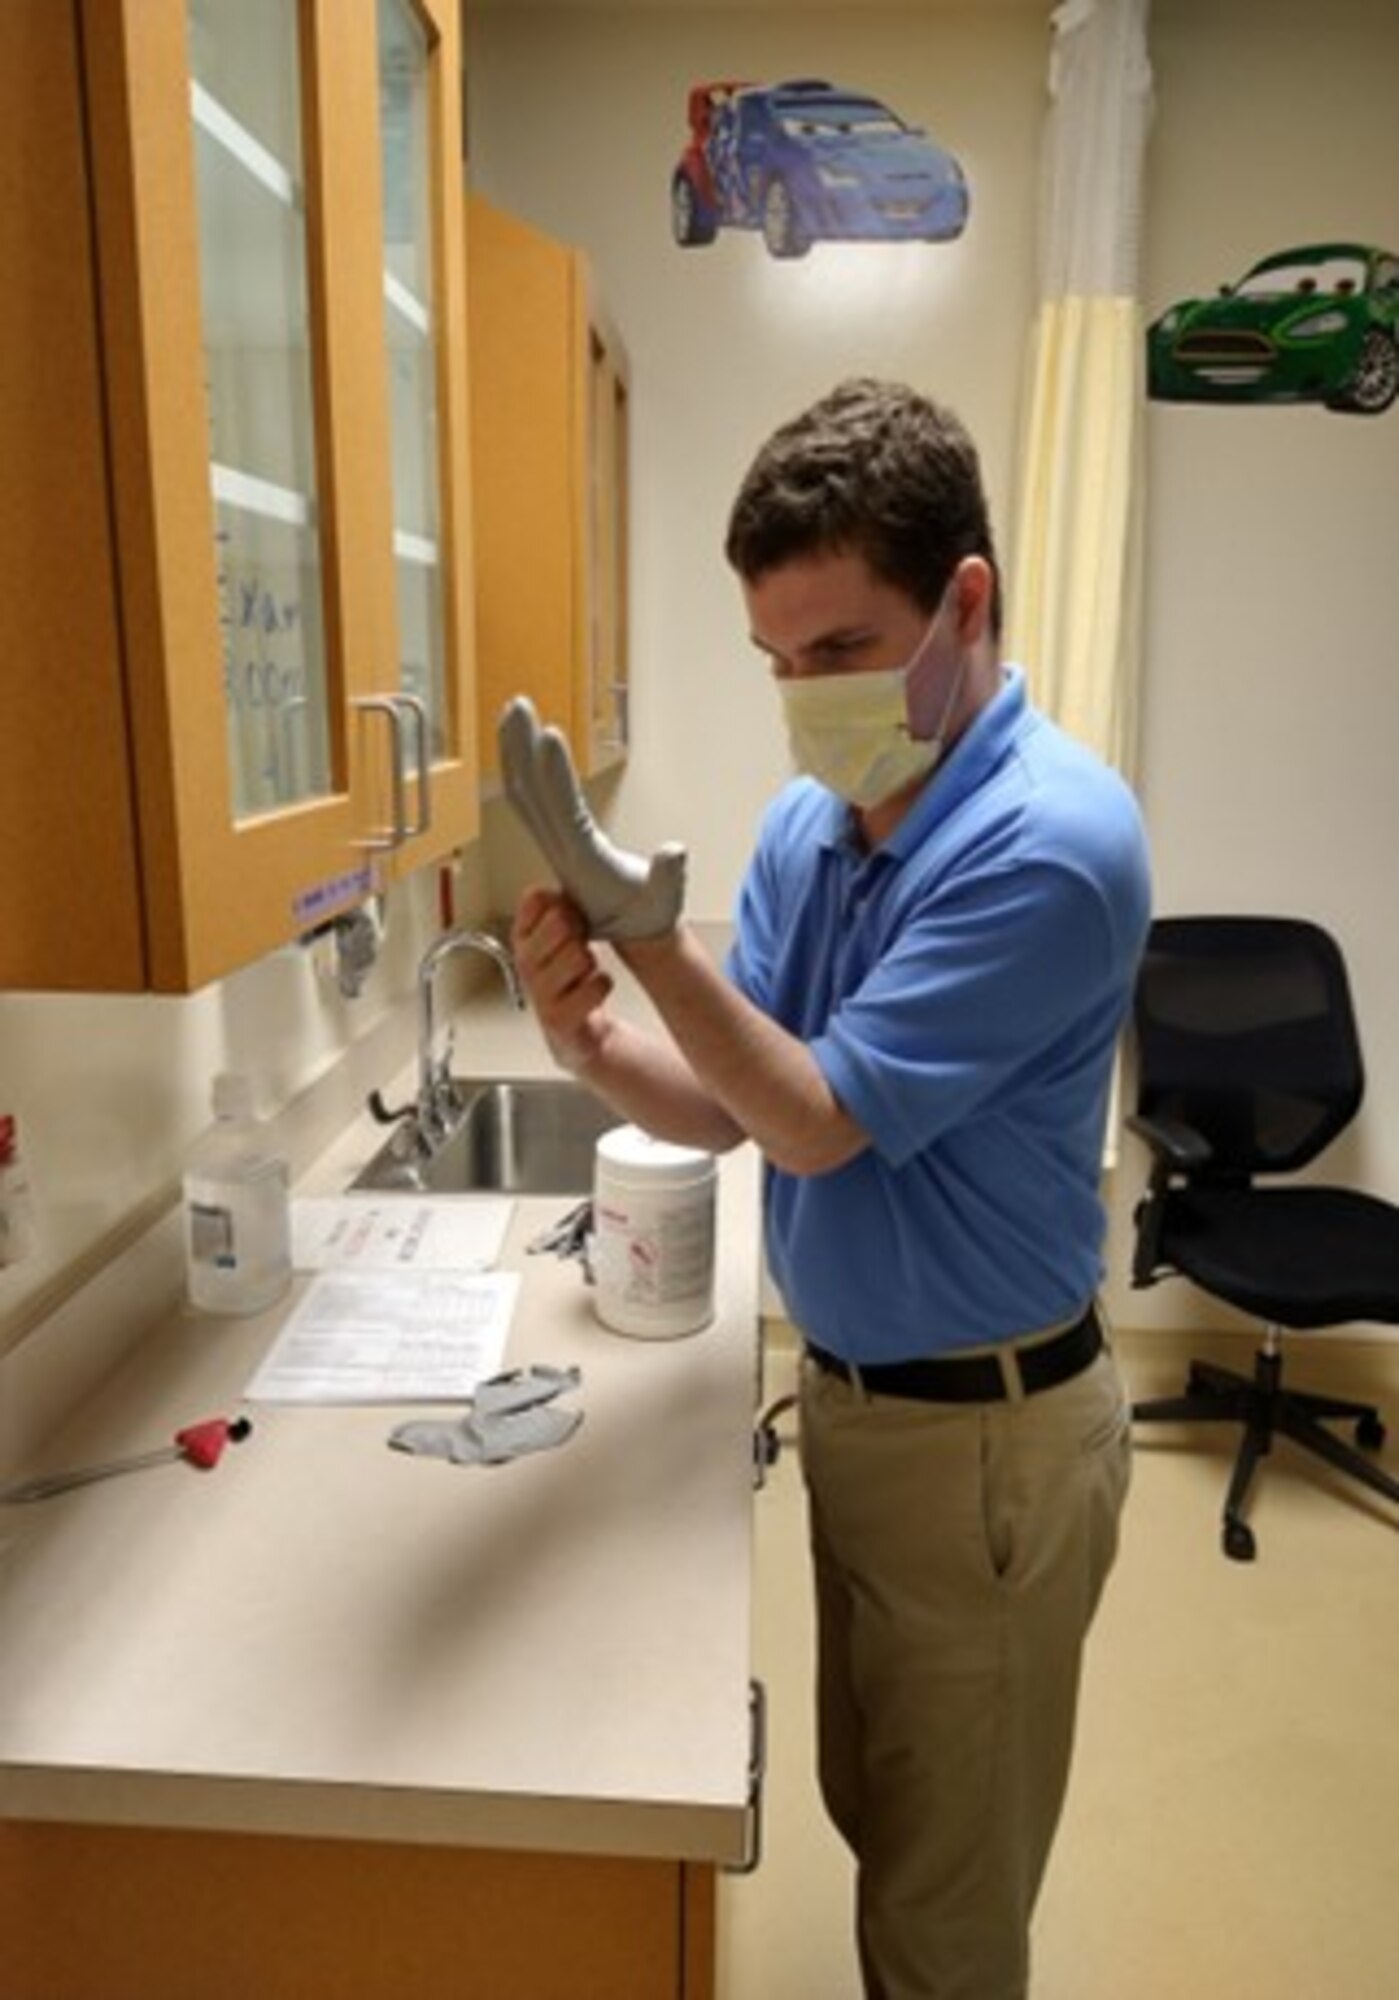 Courtesy photo of Andrew Norton, Project SEARCH intern, working in a medical examination room at the 81st Medical Group.